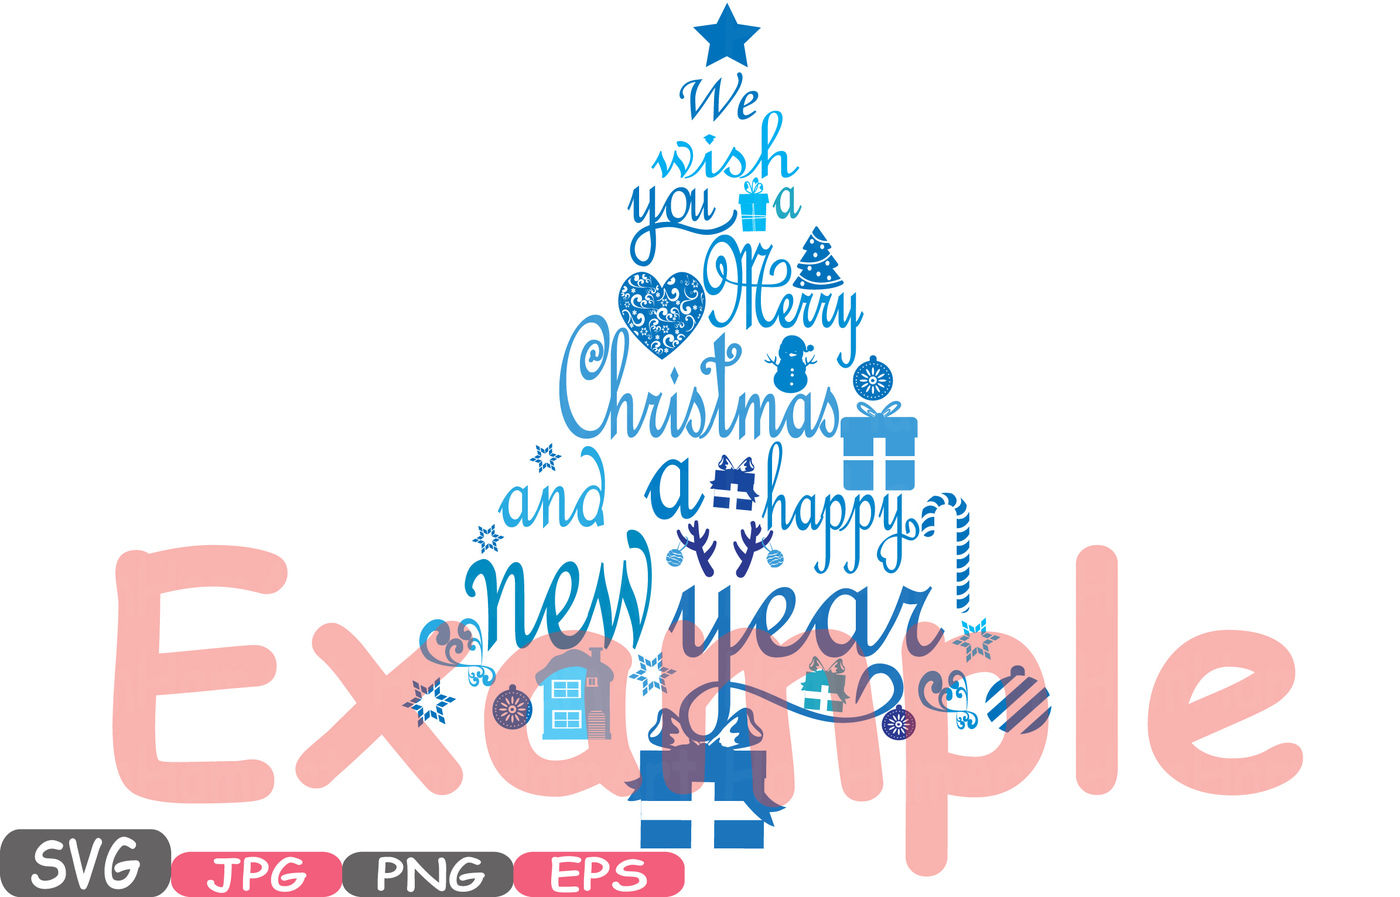 Christmas Trees We Wish You A Merry Christmas Happy New Year Word Art Cutting Files Svg Monogram Clipart Silhouette Tree Santa Claus 458s By Hamhamart Thehungryjpeg Com